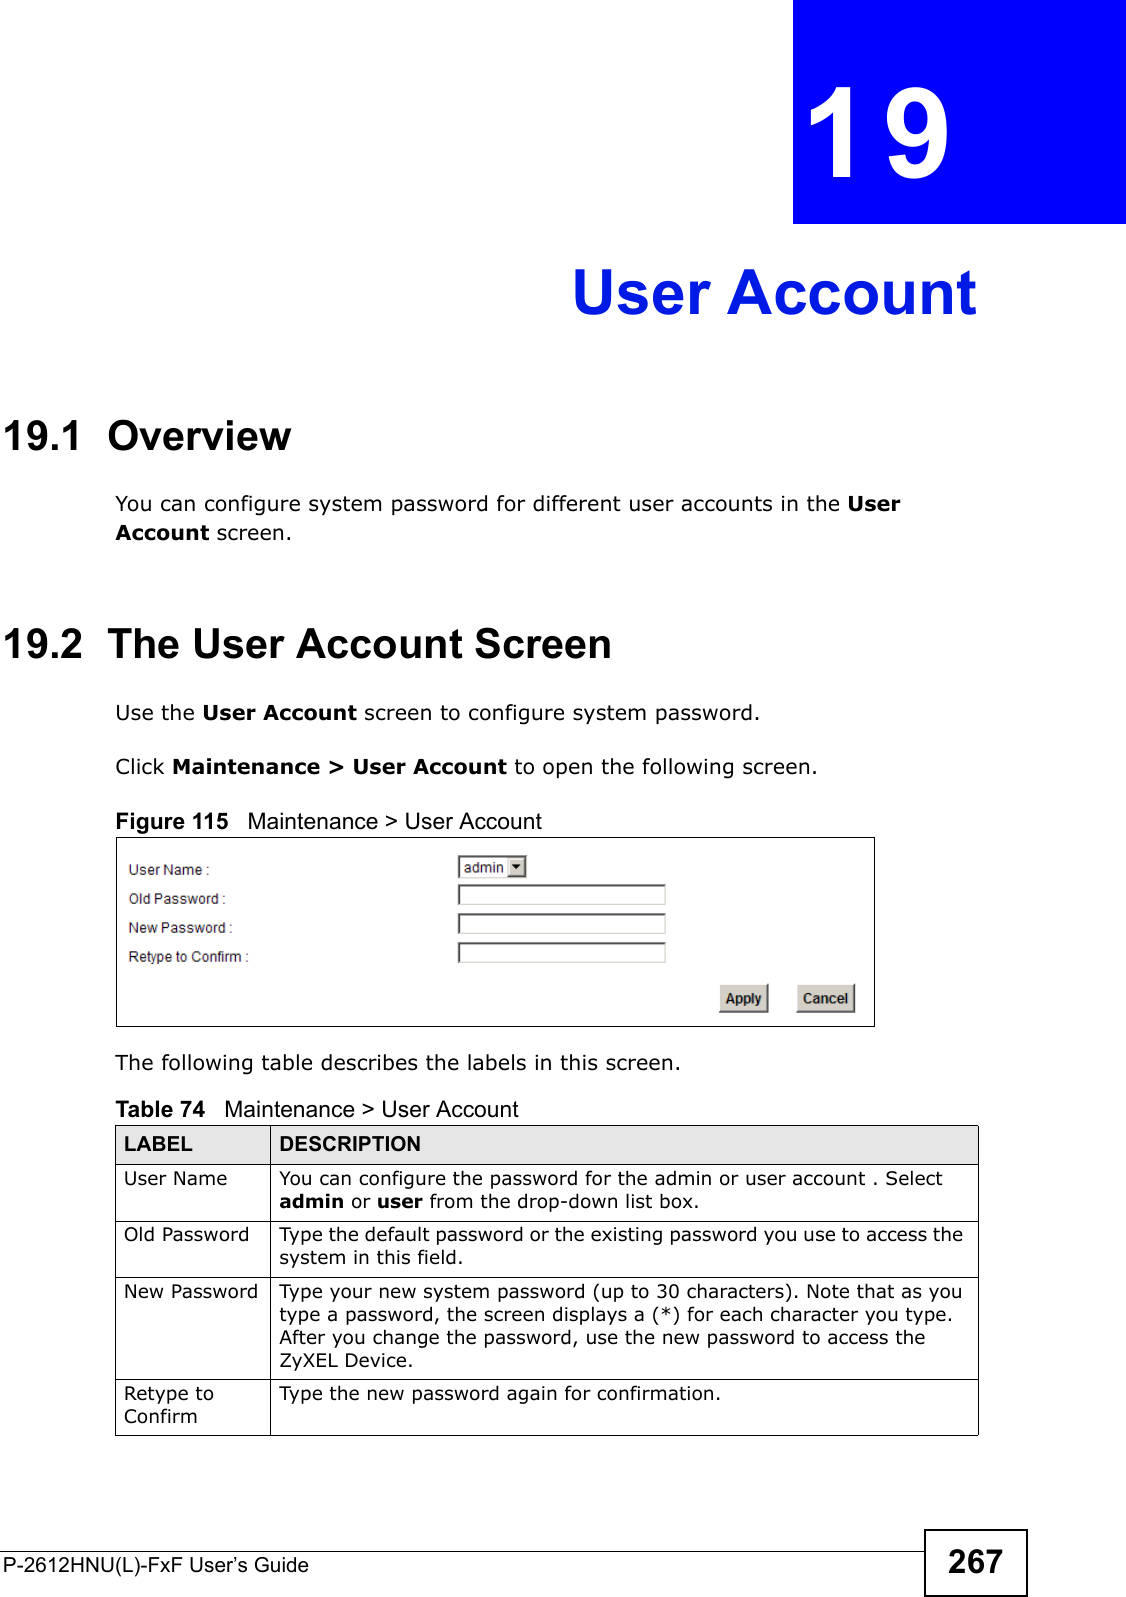 P-2612HNU(L)-FxF User’s Guide 267CHAPTER   19 User Account19.1  Overview You can configure system password for different user accounts in the User Account screen.19.2  The User Account ScreenUse the User Account screen to configure system password.Click Maintenance &gt; User Account to open the following screen. Figure 115   Maintenance &gt; User AccountThe following table describes the labels in this screen. Table 74   Maintenance &gt; User AccountLABEL DESCRIPTIONUser Name You can configure the password for the admin or user account . Select admin or user from the drop-down list box.Old Password Type the default password or the existing password you use to access the system in this field.New Password Type your new system password (up to 30 characters). Note that as you type a password, the screen displays a (*) for each character you type. After you change the password, use the new password to access the ZyXEL Device.Retype to ConfirmType the new password again for confirmation.